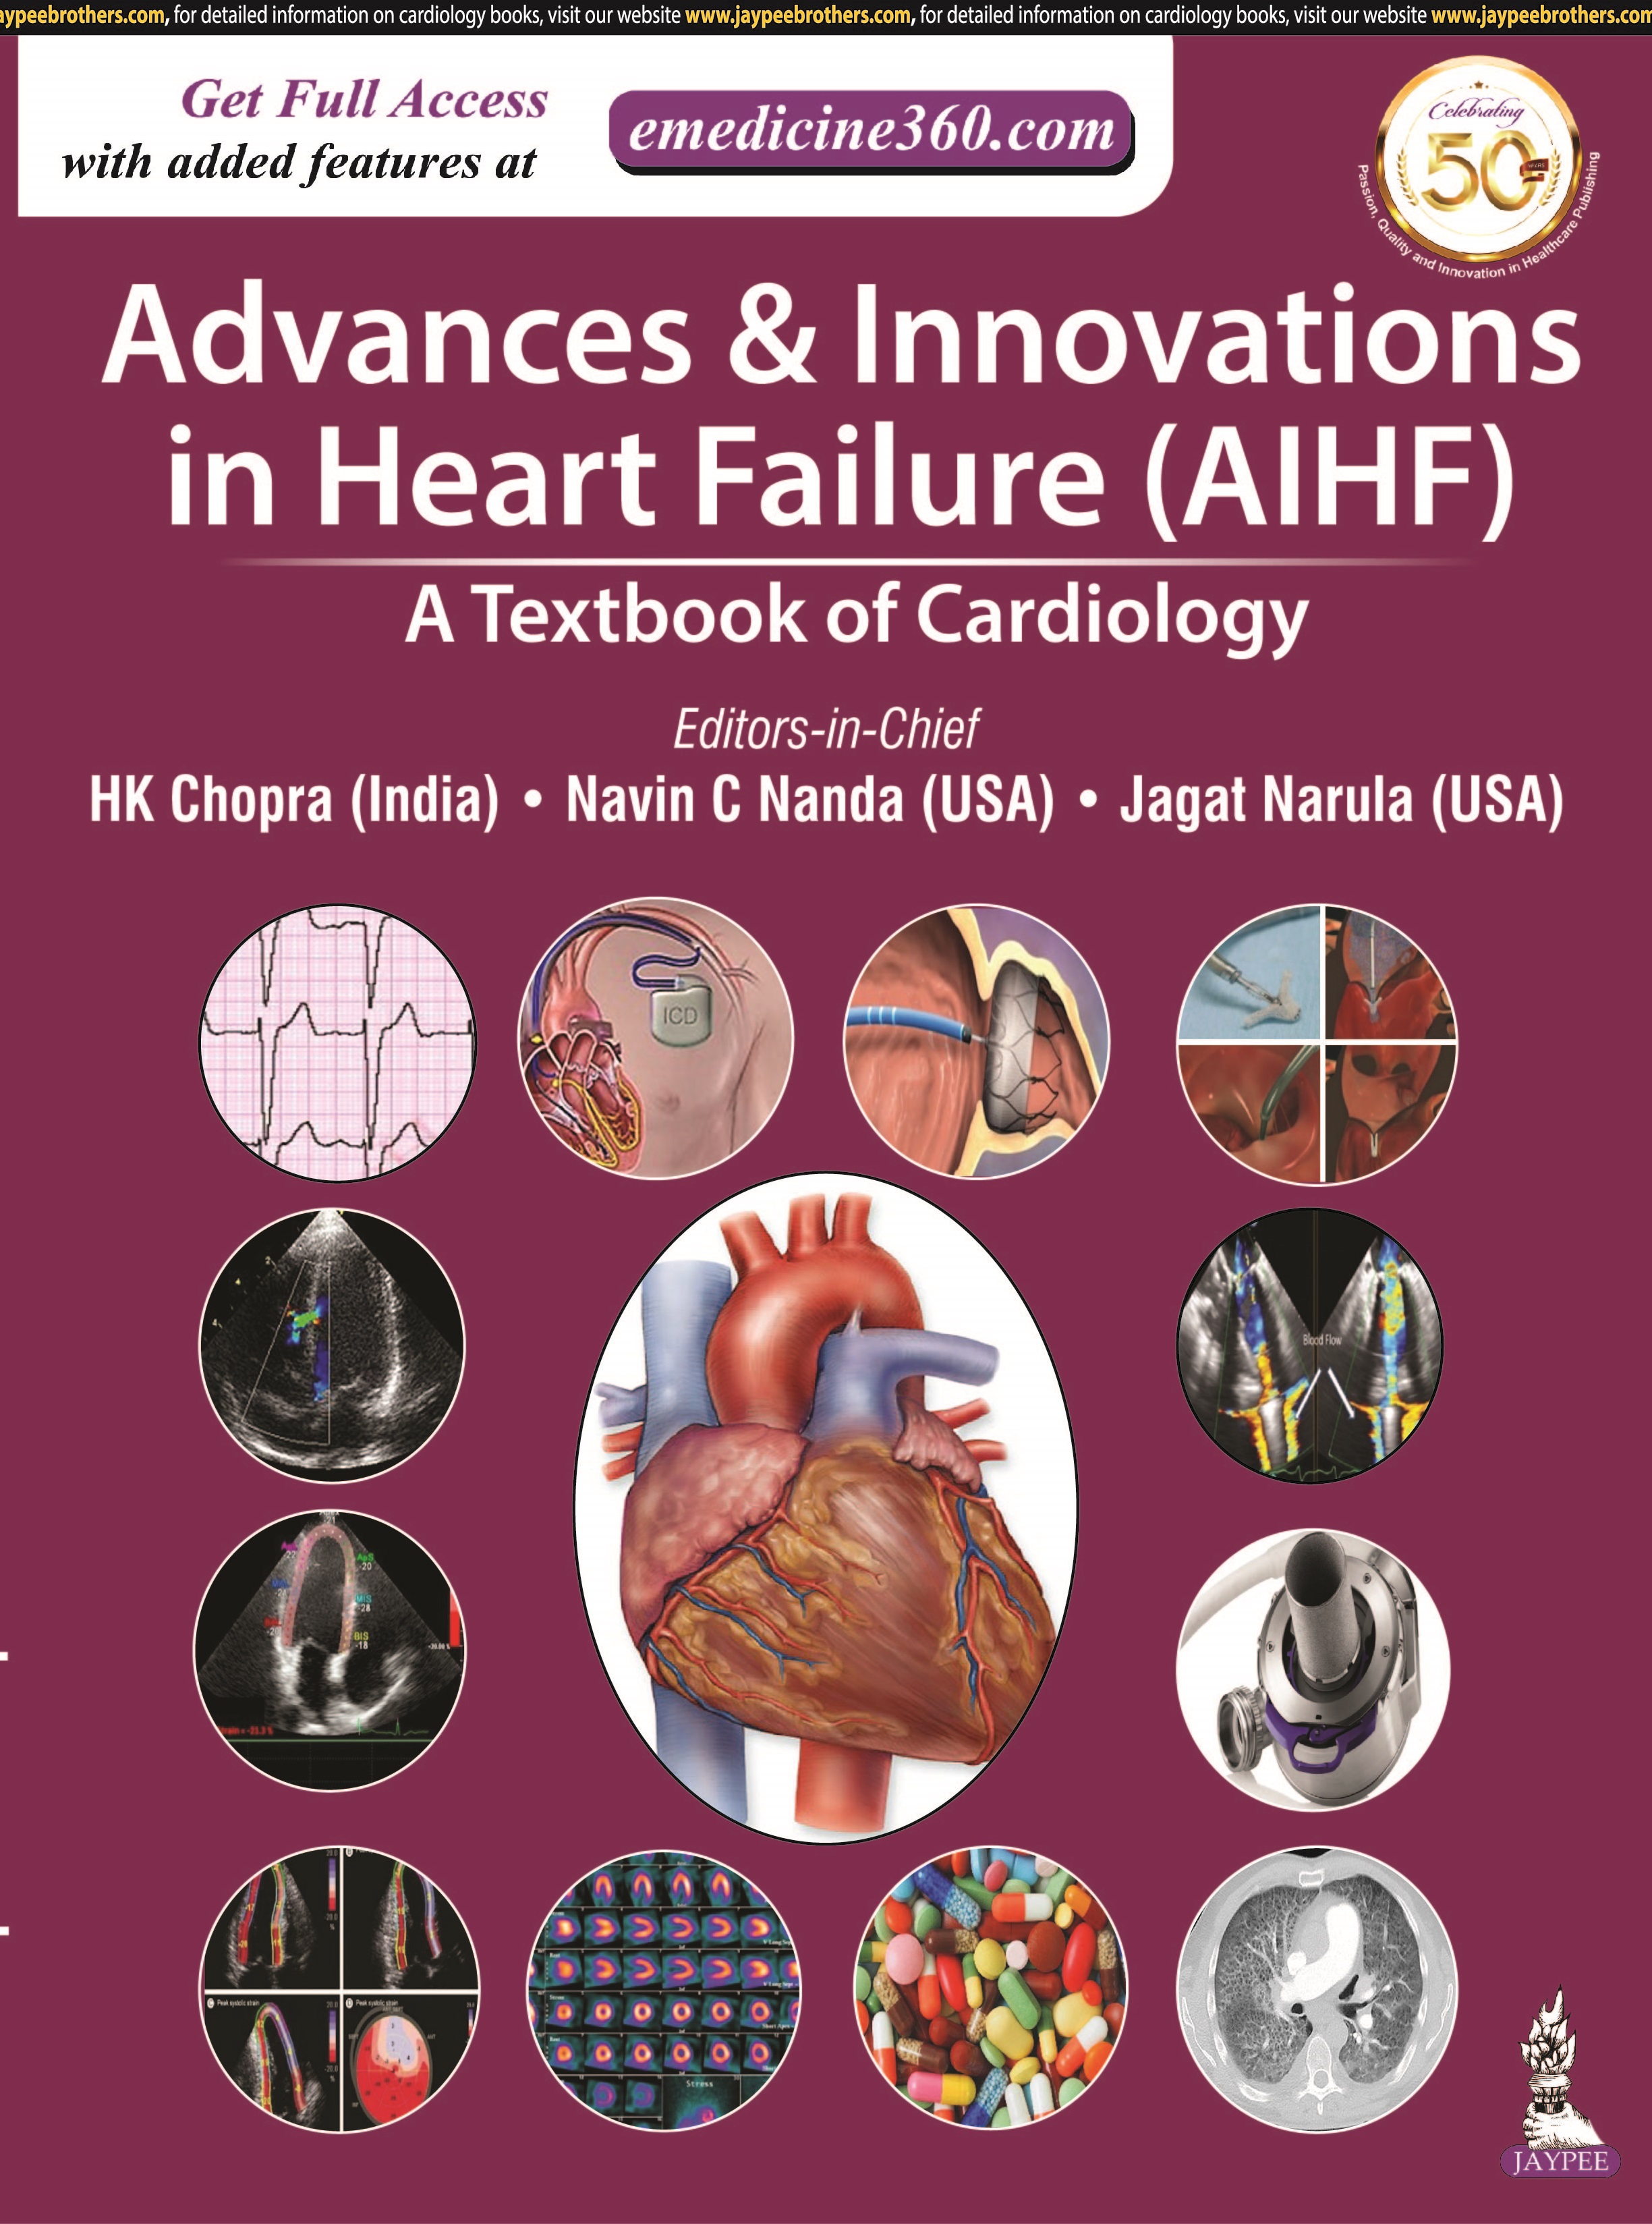 Advances & Innovations In Heart Failure (Aihf): A Textbook Of Cardiology
